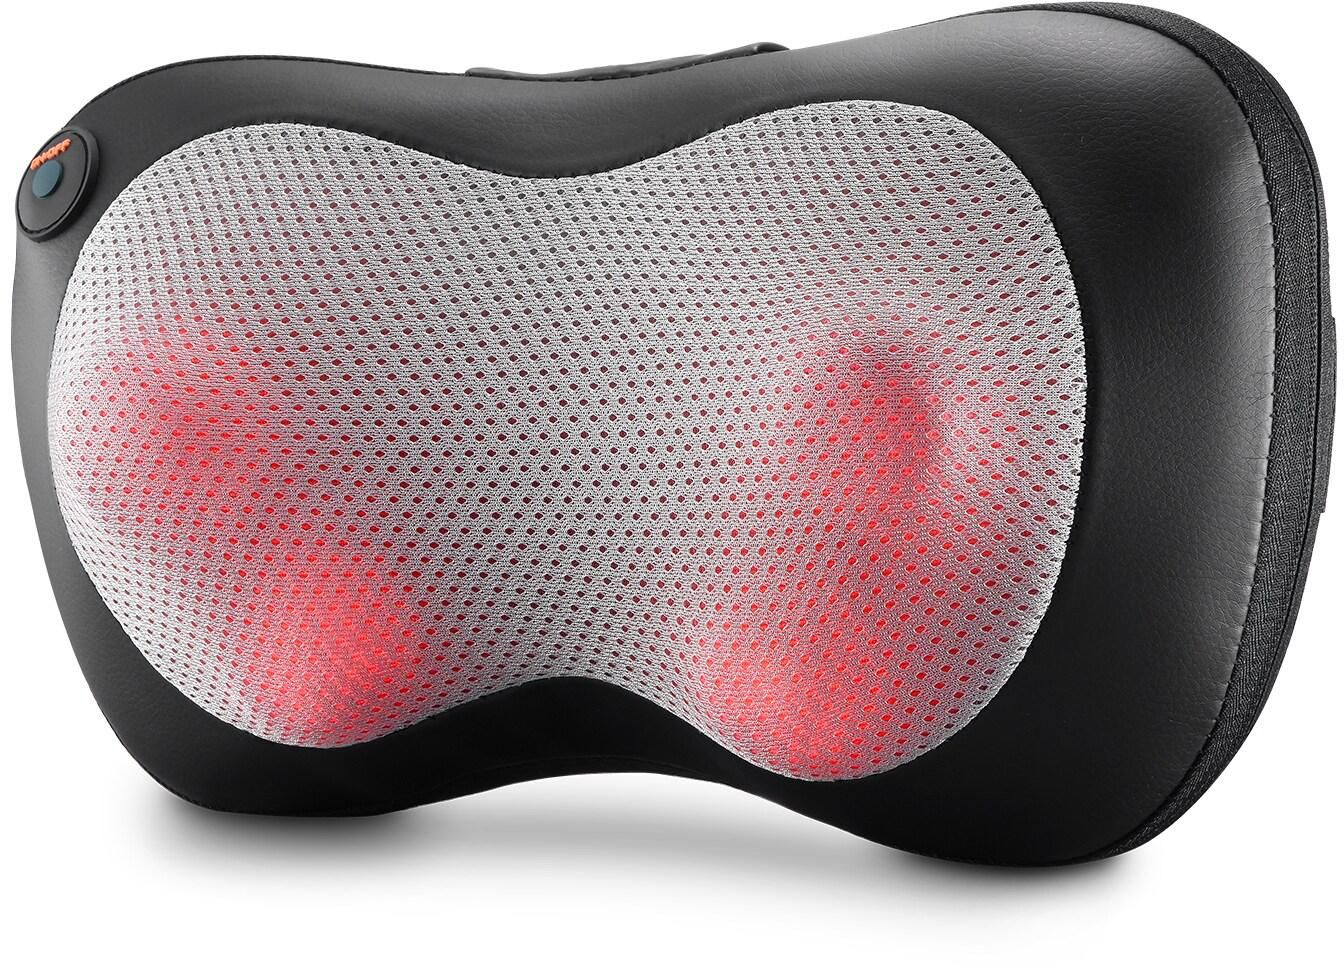 Pureheal Pillow Massager Deep Kneading Shiatsu Massage Heating Function Soothes Aching Muscles - Black